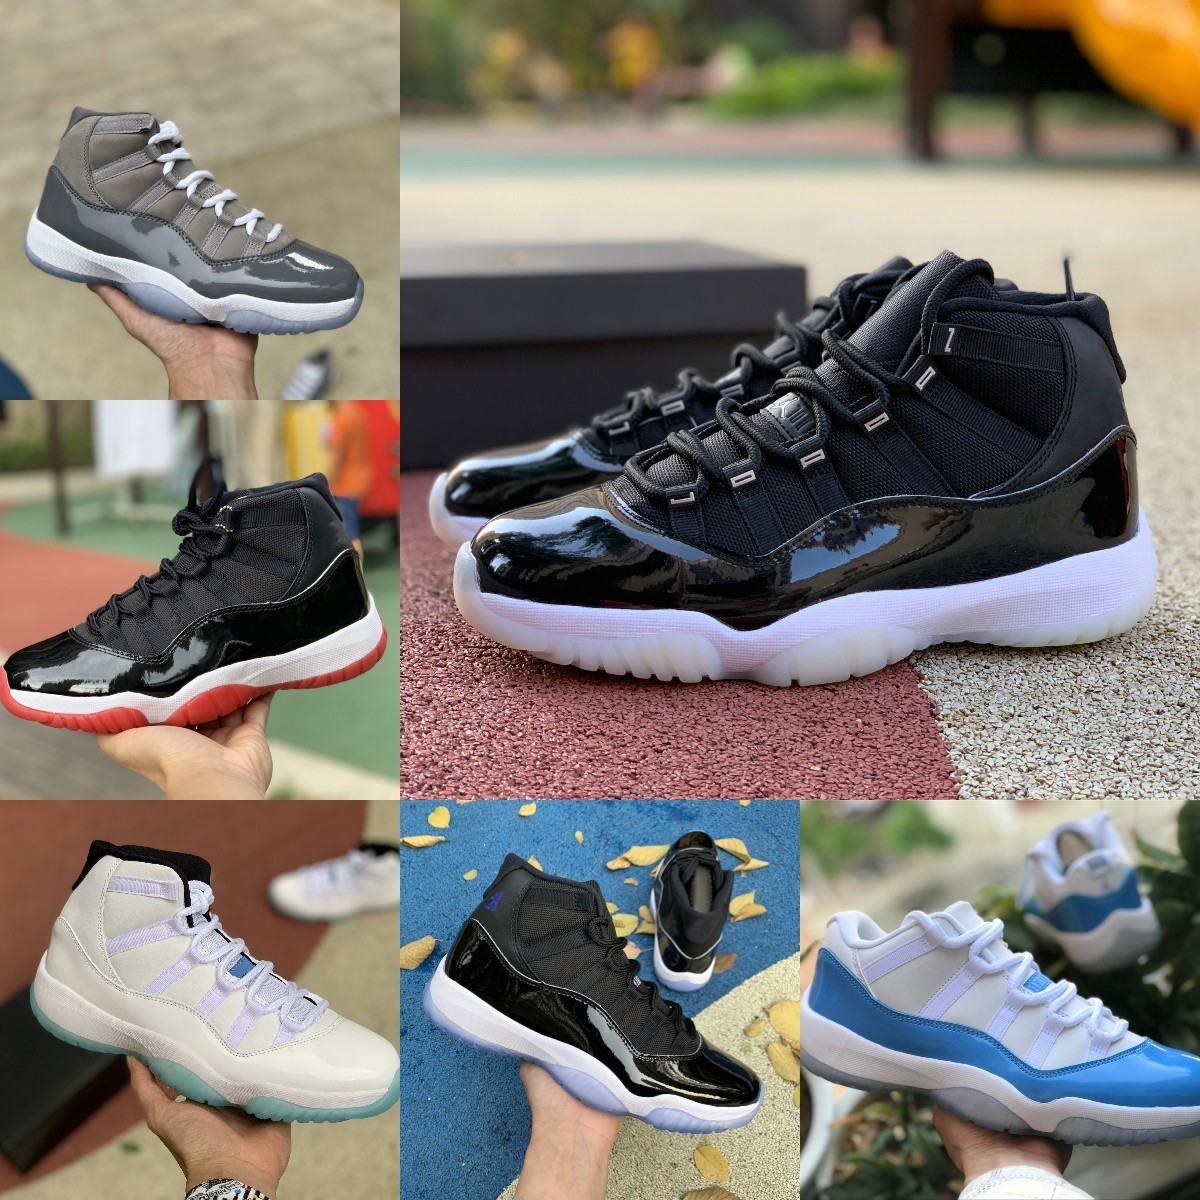 

Jumpman Jubilee Bred 11 11s High Basketball Shoes COOL GREY Legend Blue 25th Anniversary Space Jam Gamma Blue Easter Concord 45 Low Columbia White Red Sneakers S55, Please contact us